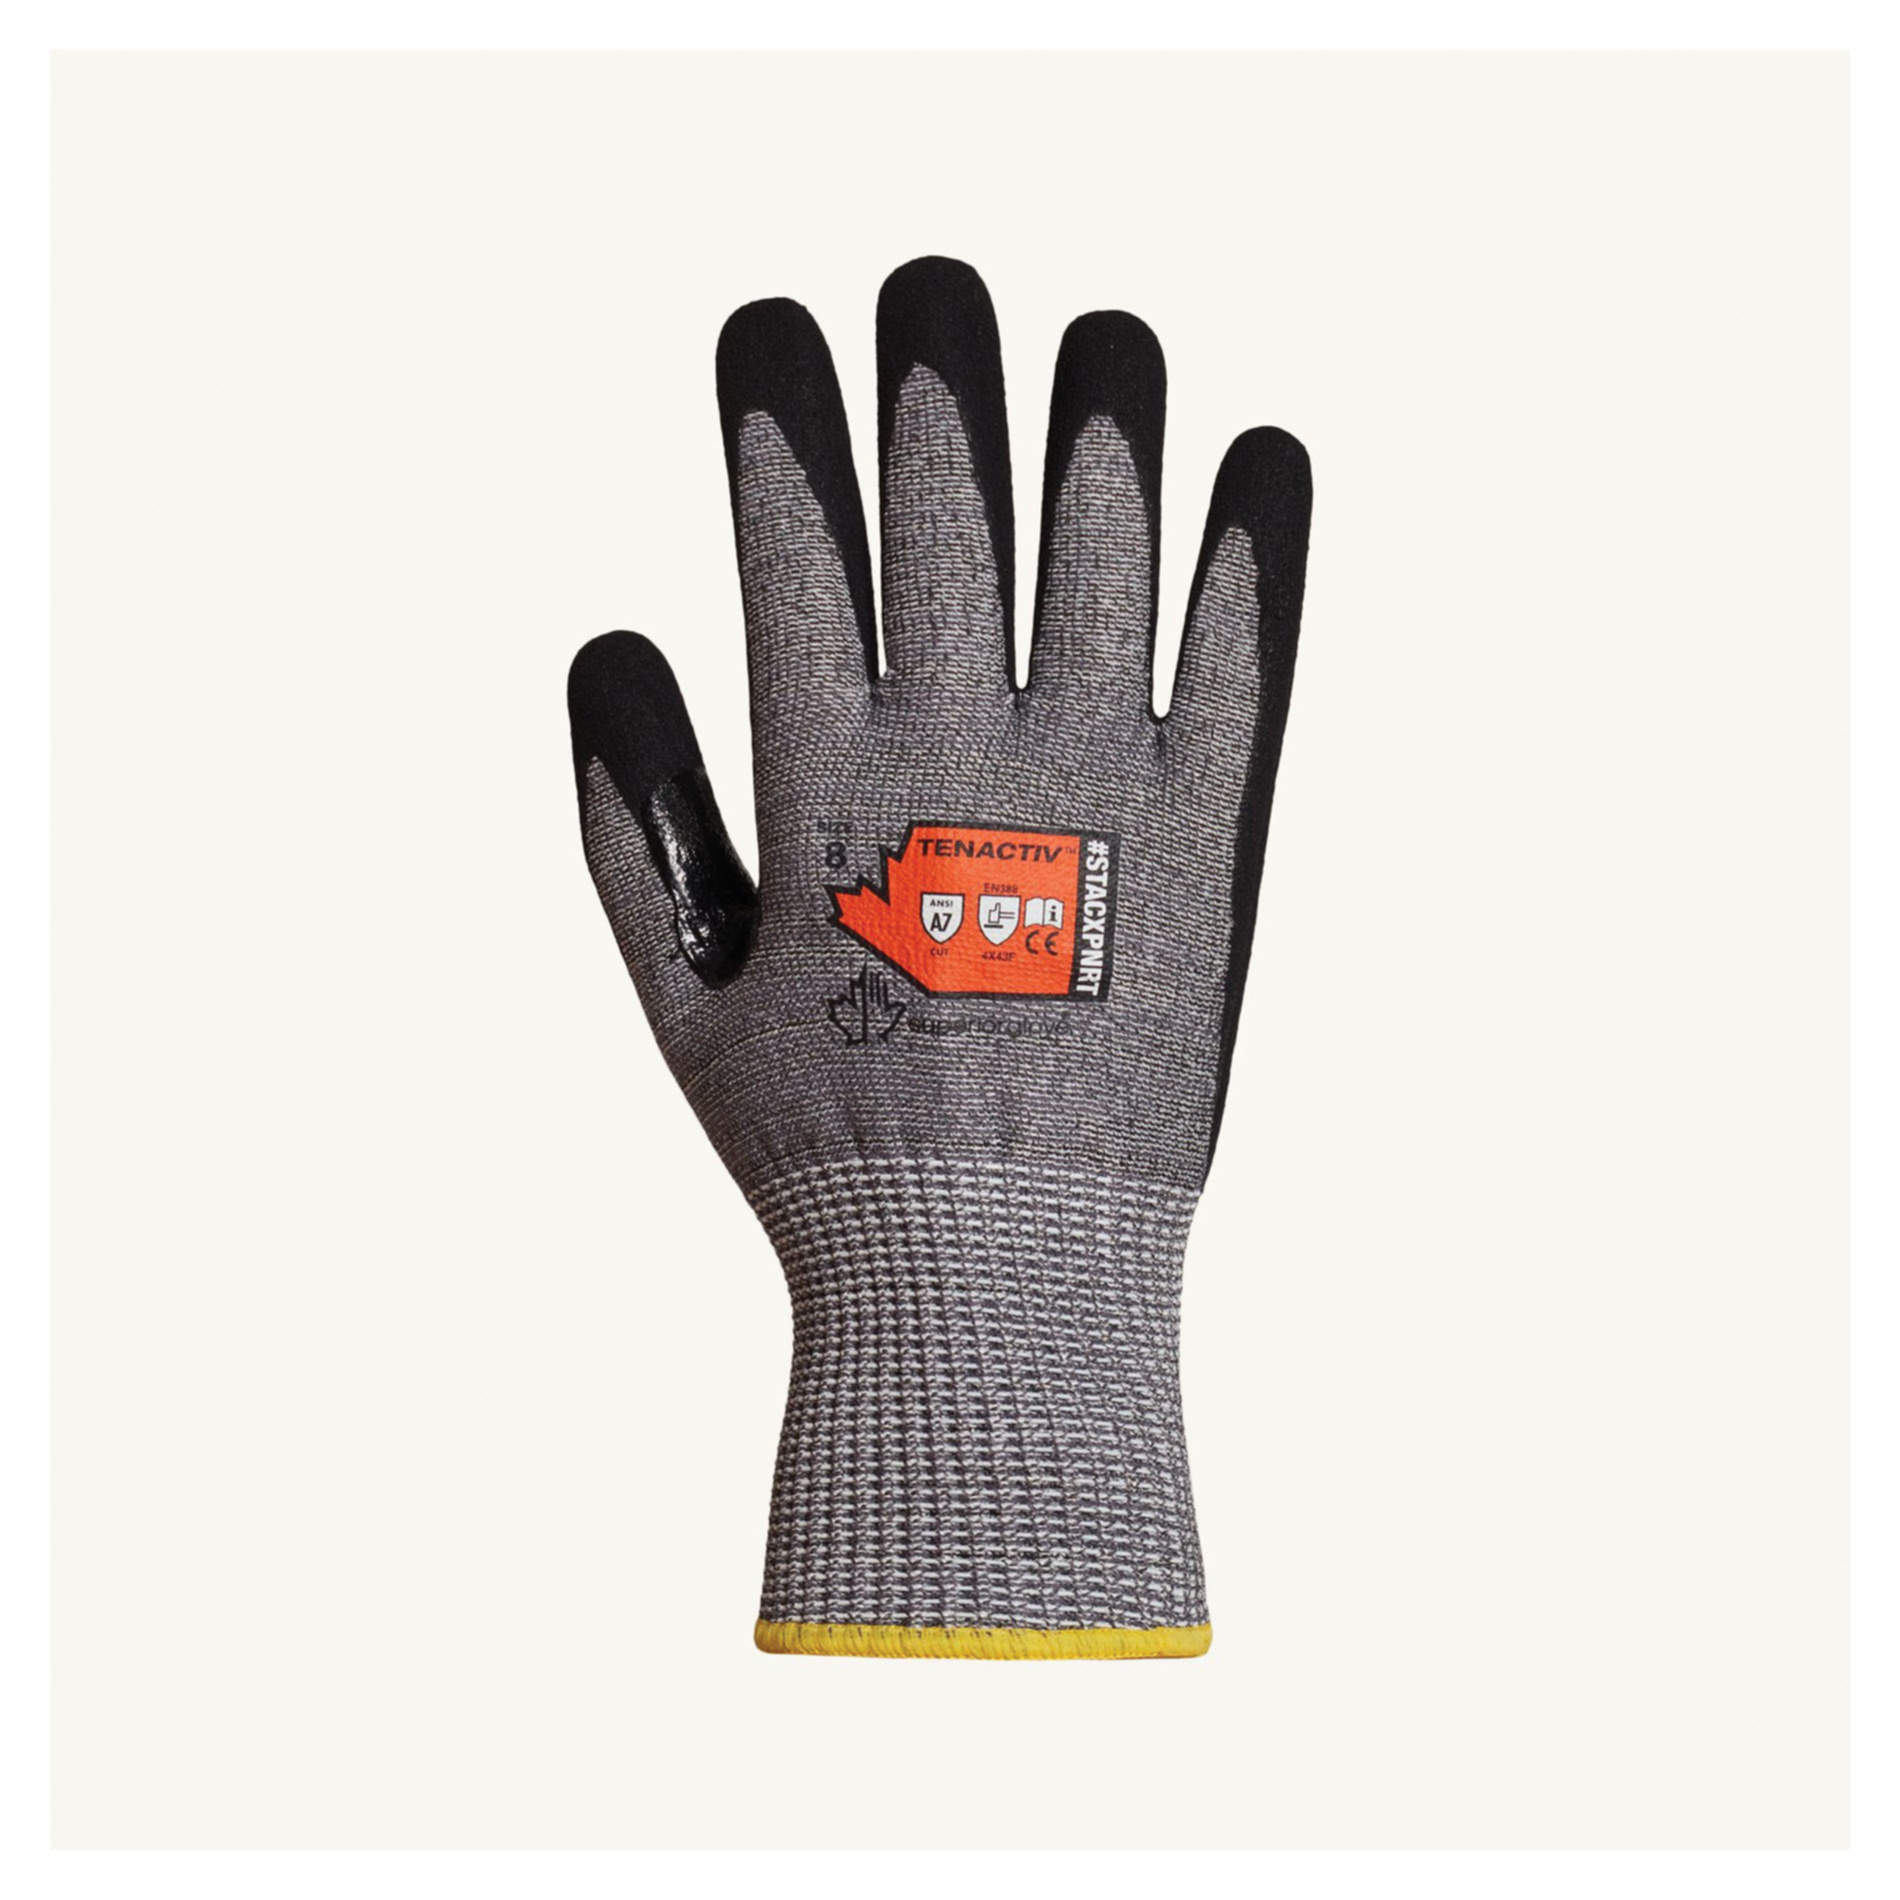 Superior Glove Works STACXPNRT-8 Cut-Resistant Coated & Dipped Gl